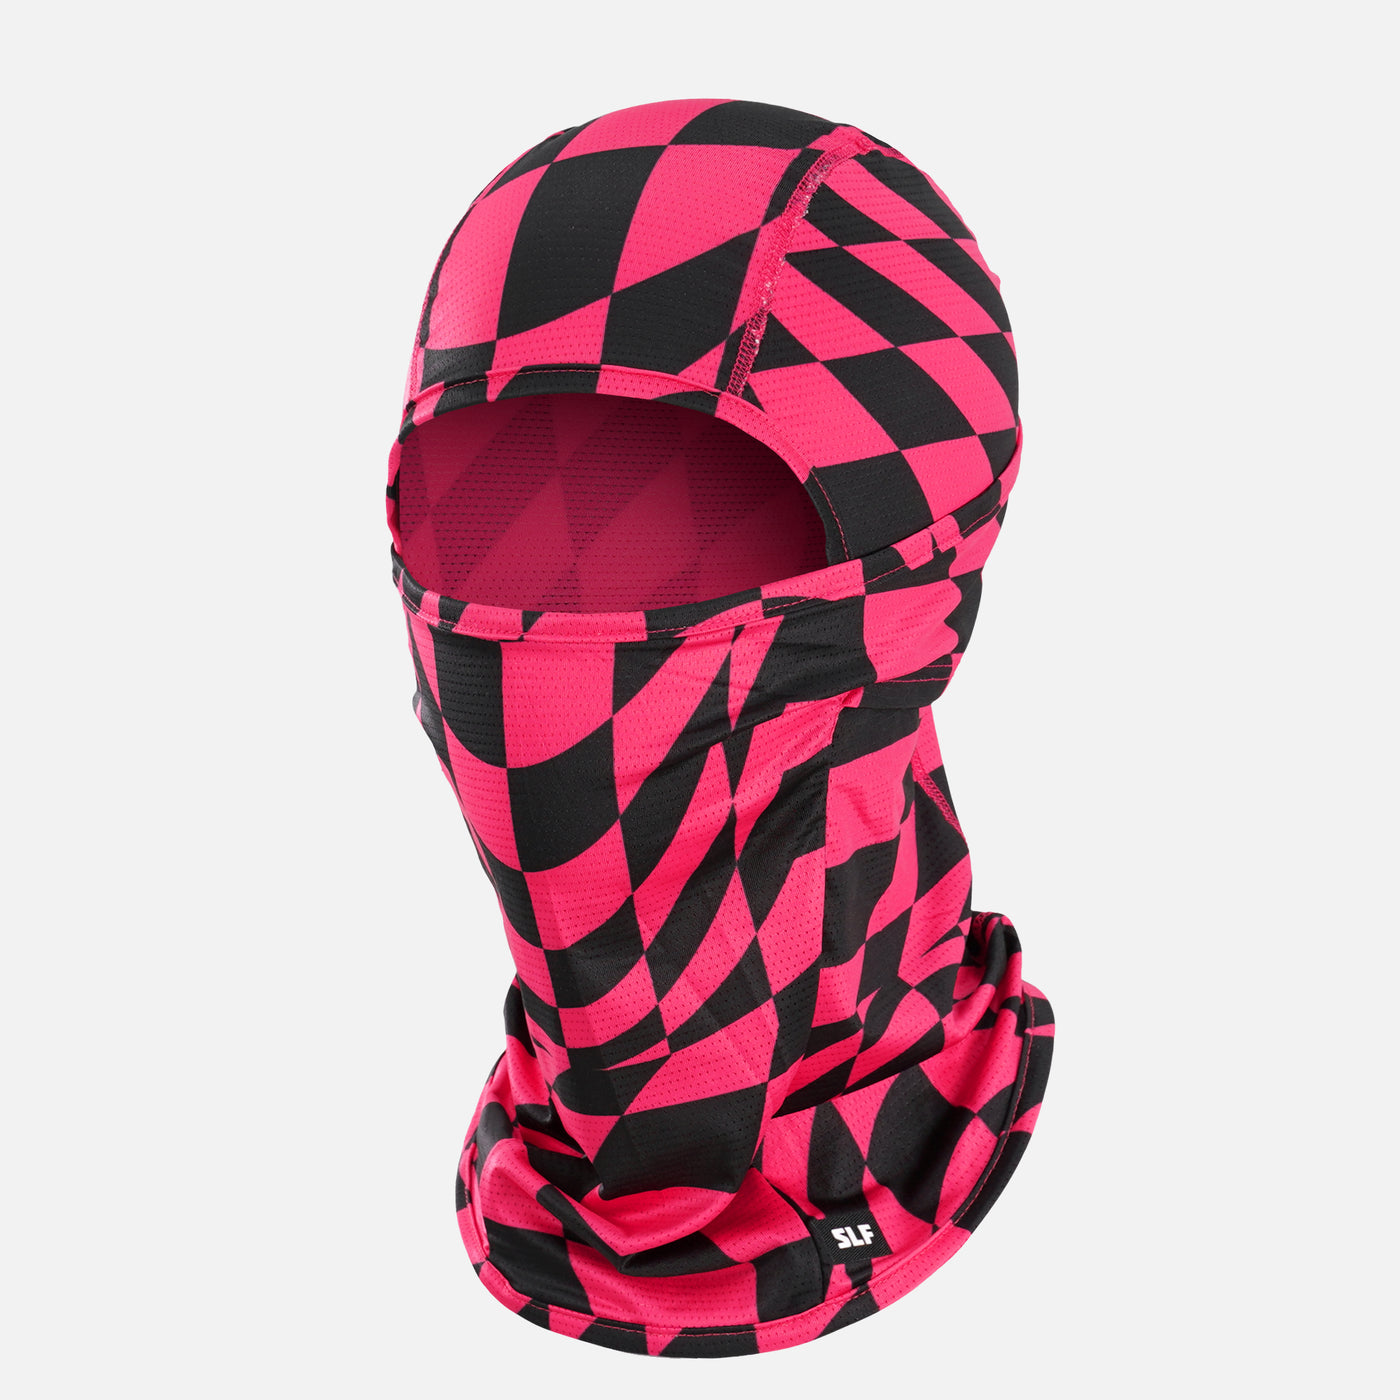 Pink Warped Checkered Loose-fitting Shiesty Mask